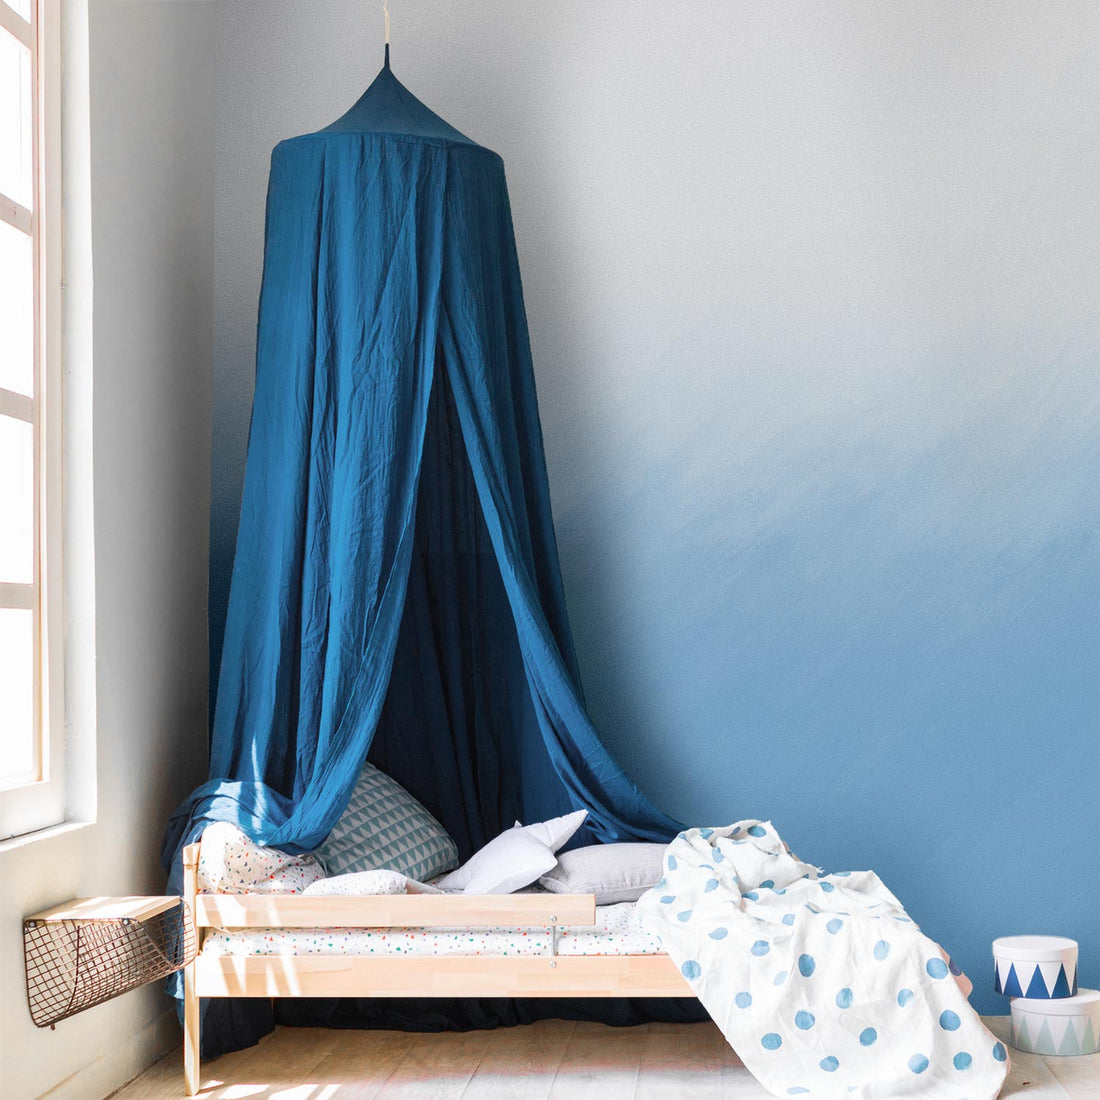 small kids bedroom interior with blue canopy bed detailing and ombre wall mural